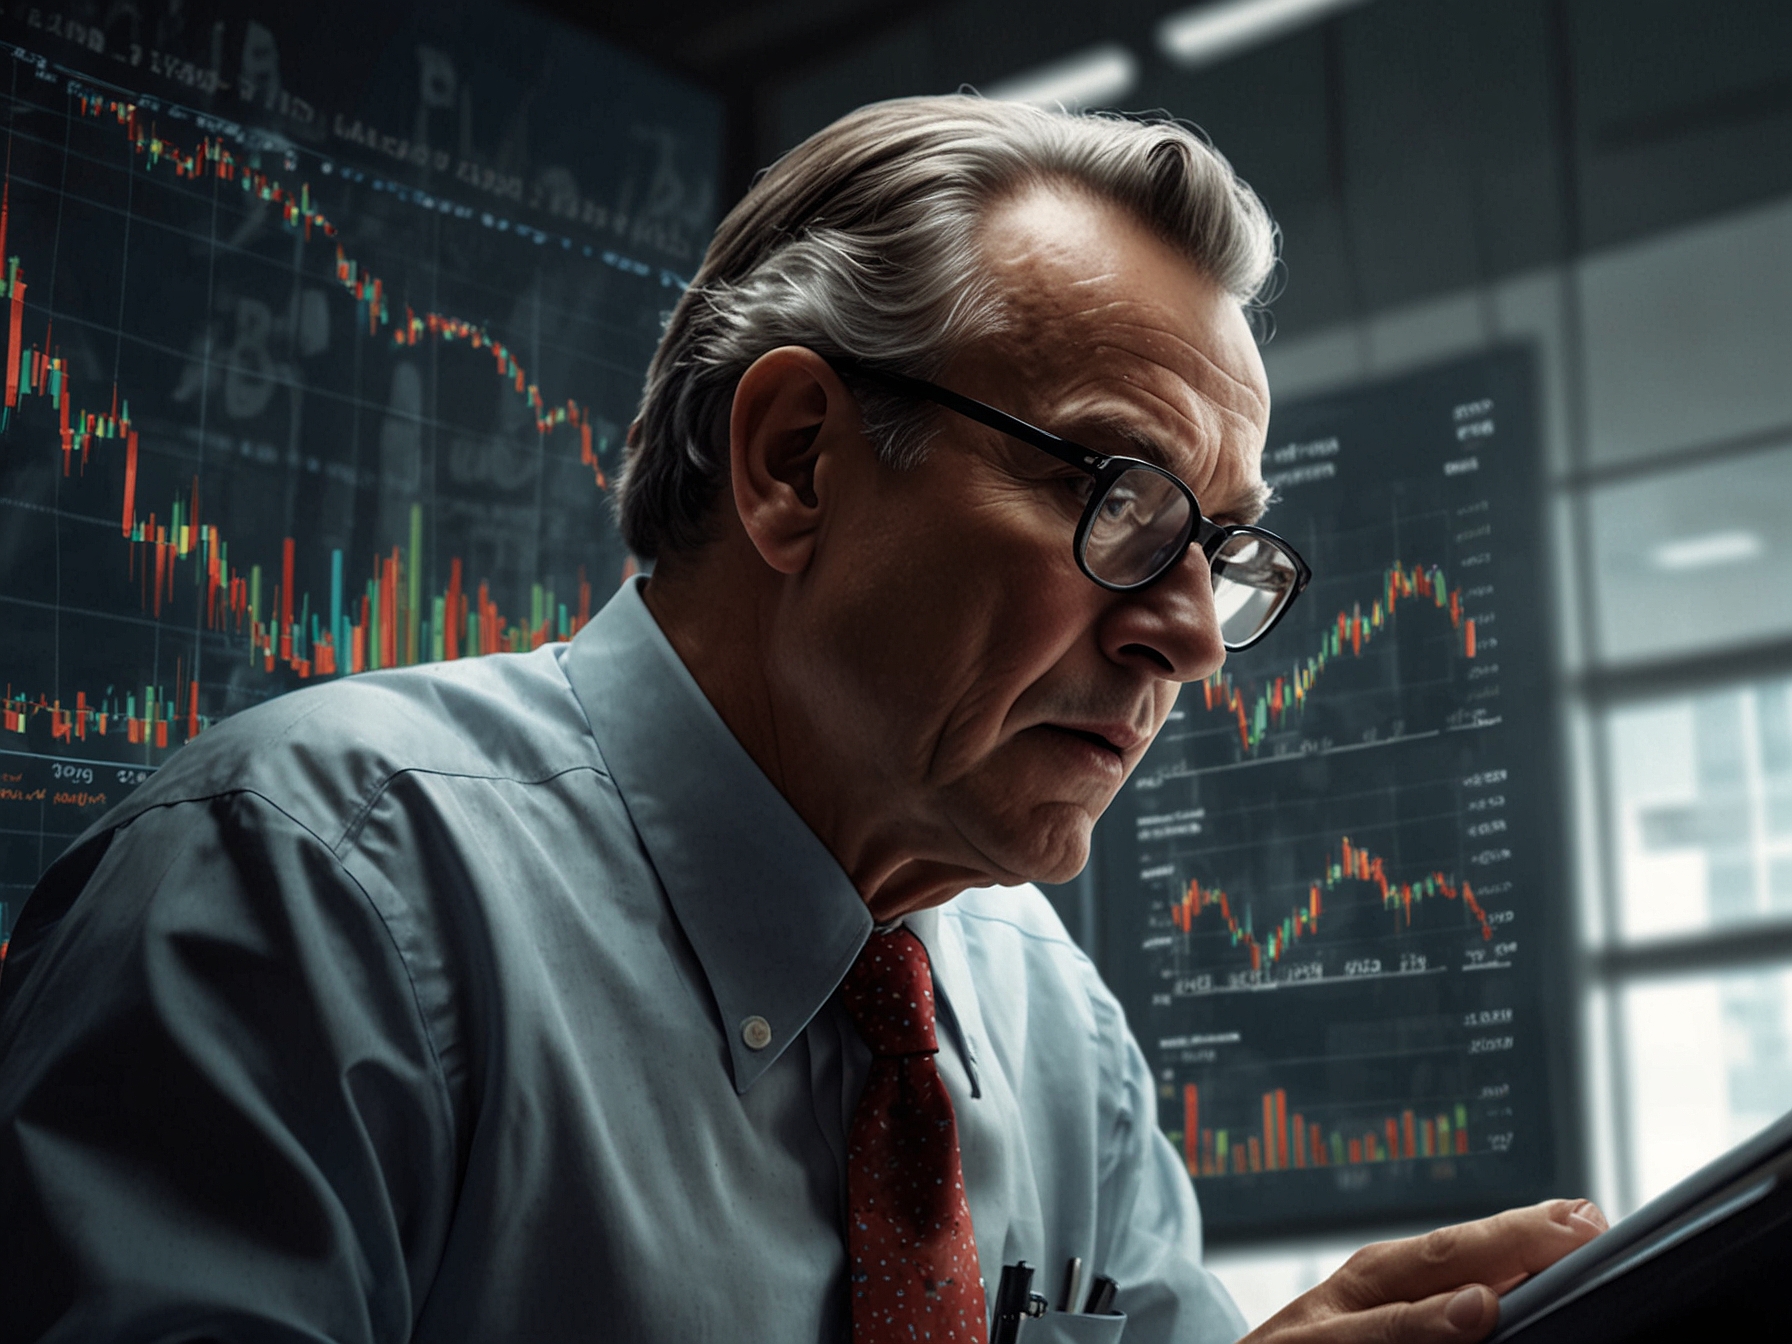 An analyst reviewing HUDCO’s market data and economic indicators, emphasizing the influence of government policies, recent earnings reports, and sector developments on the share price.